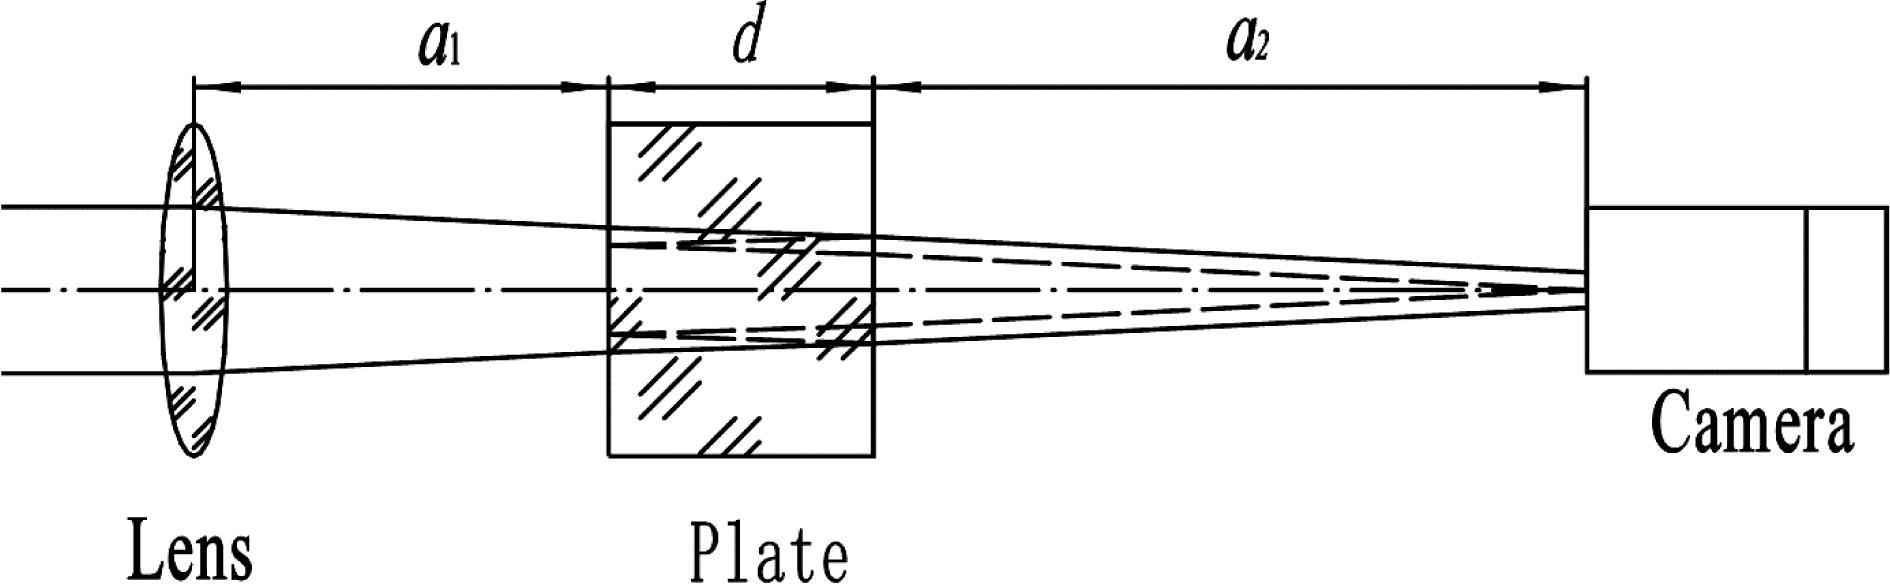 Scheme of the single lens alignment sensor and reference.